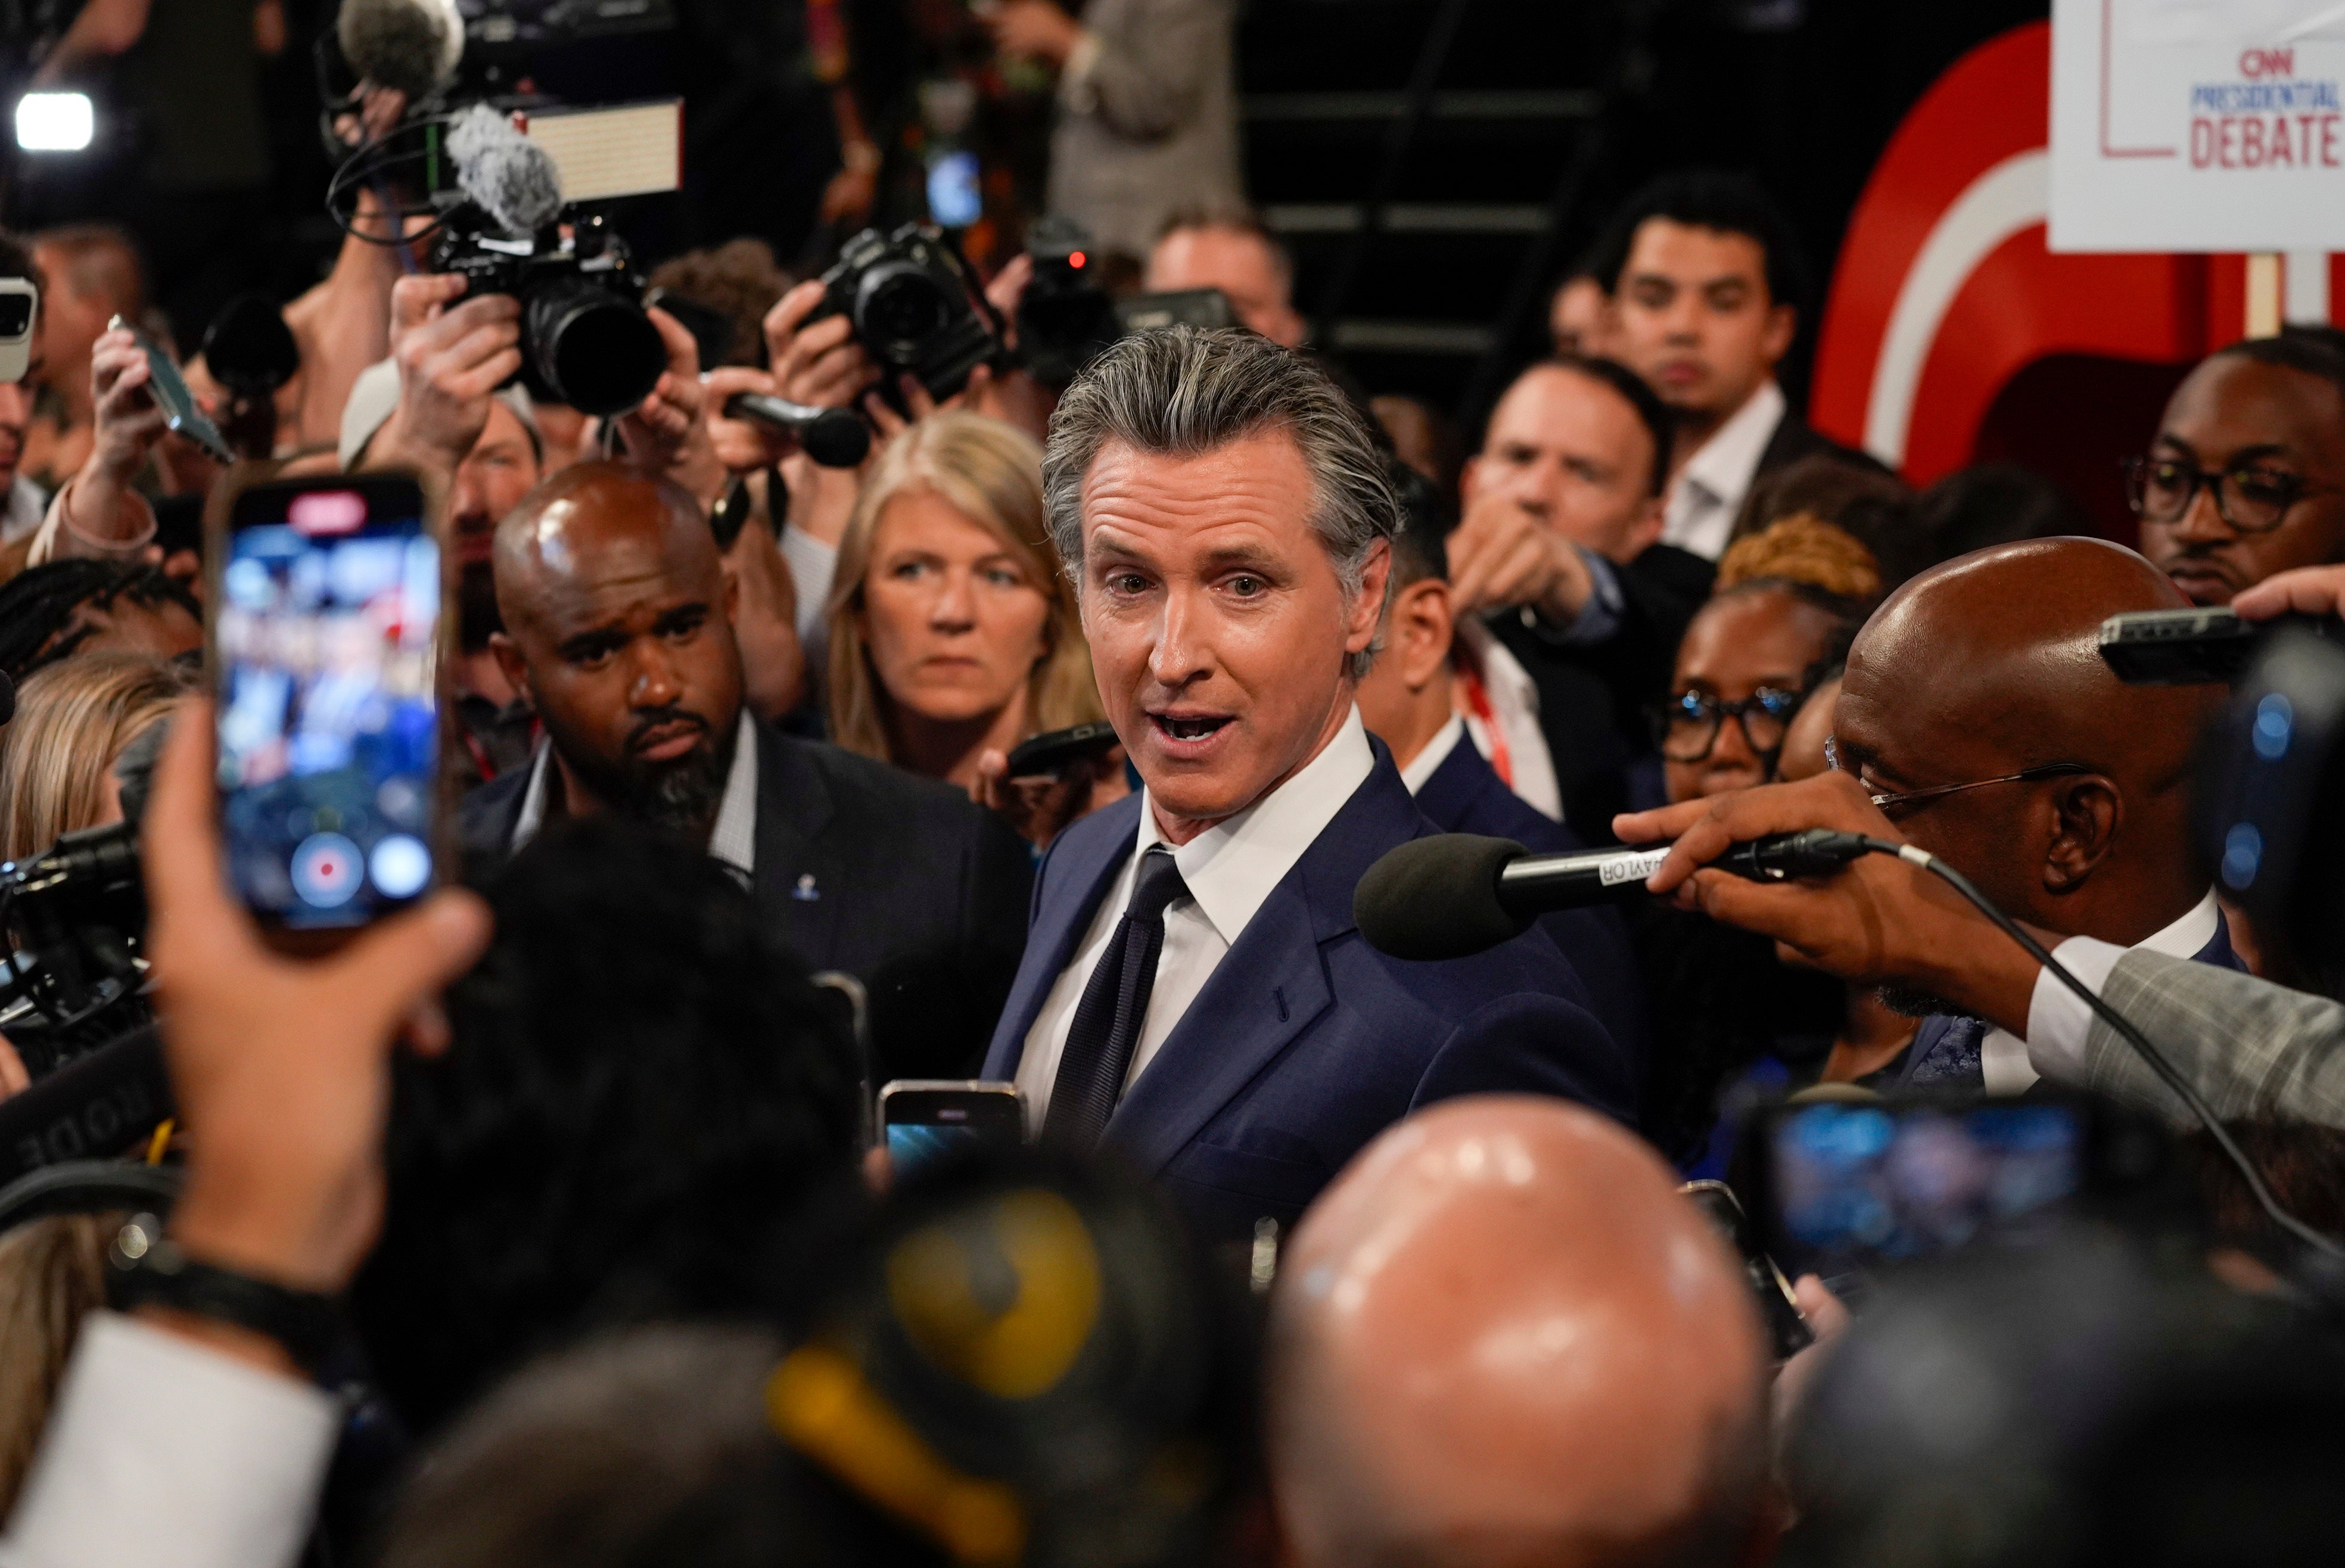 Gavin Newsom has pledged to finish his second term as governor of California